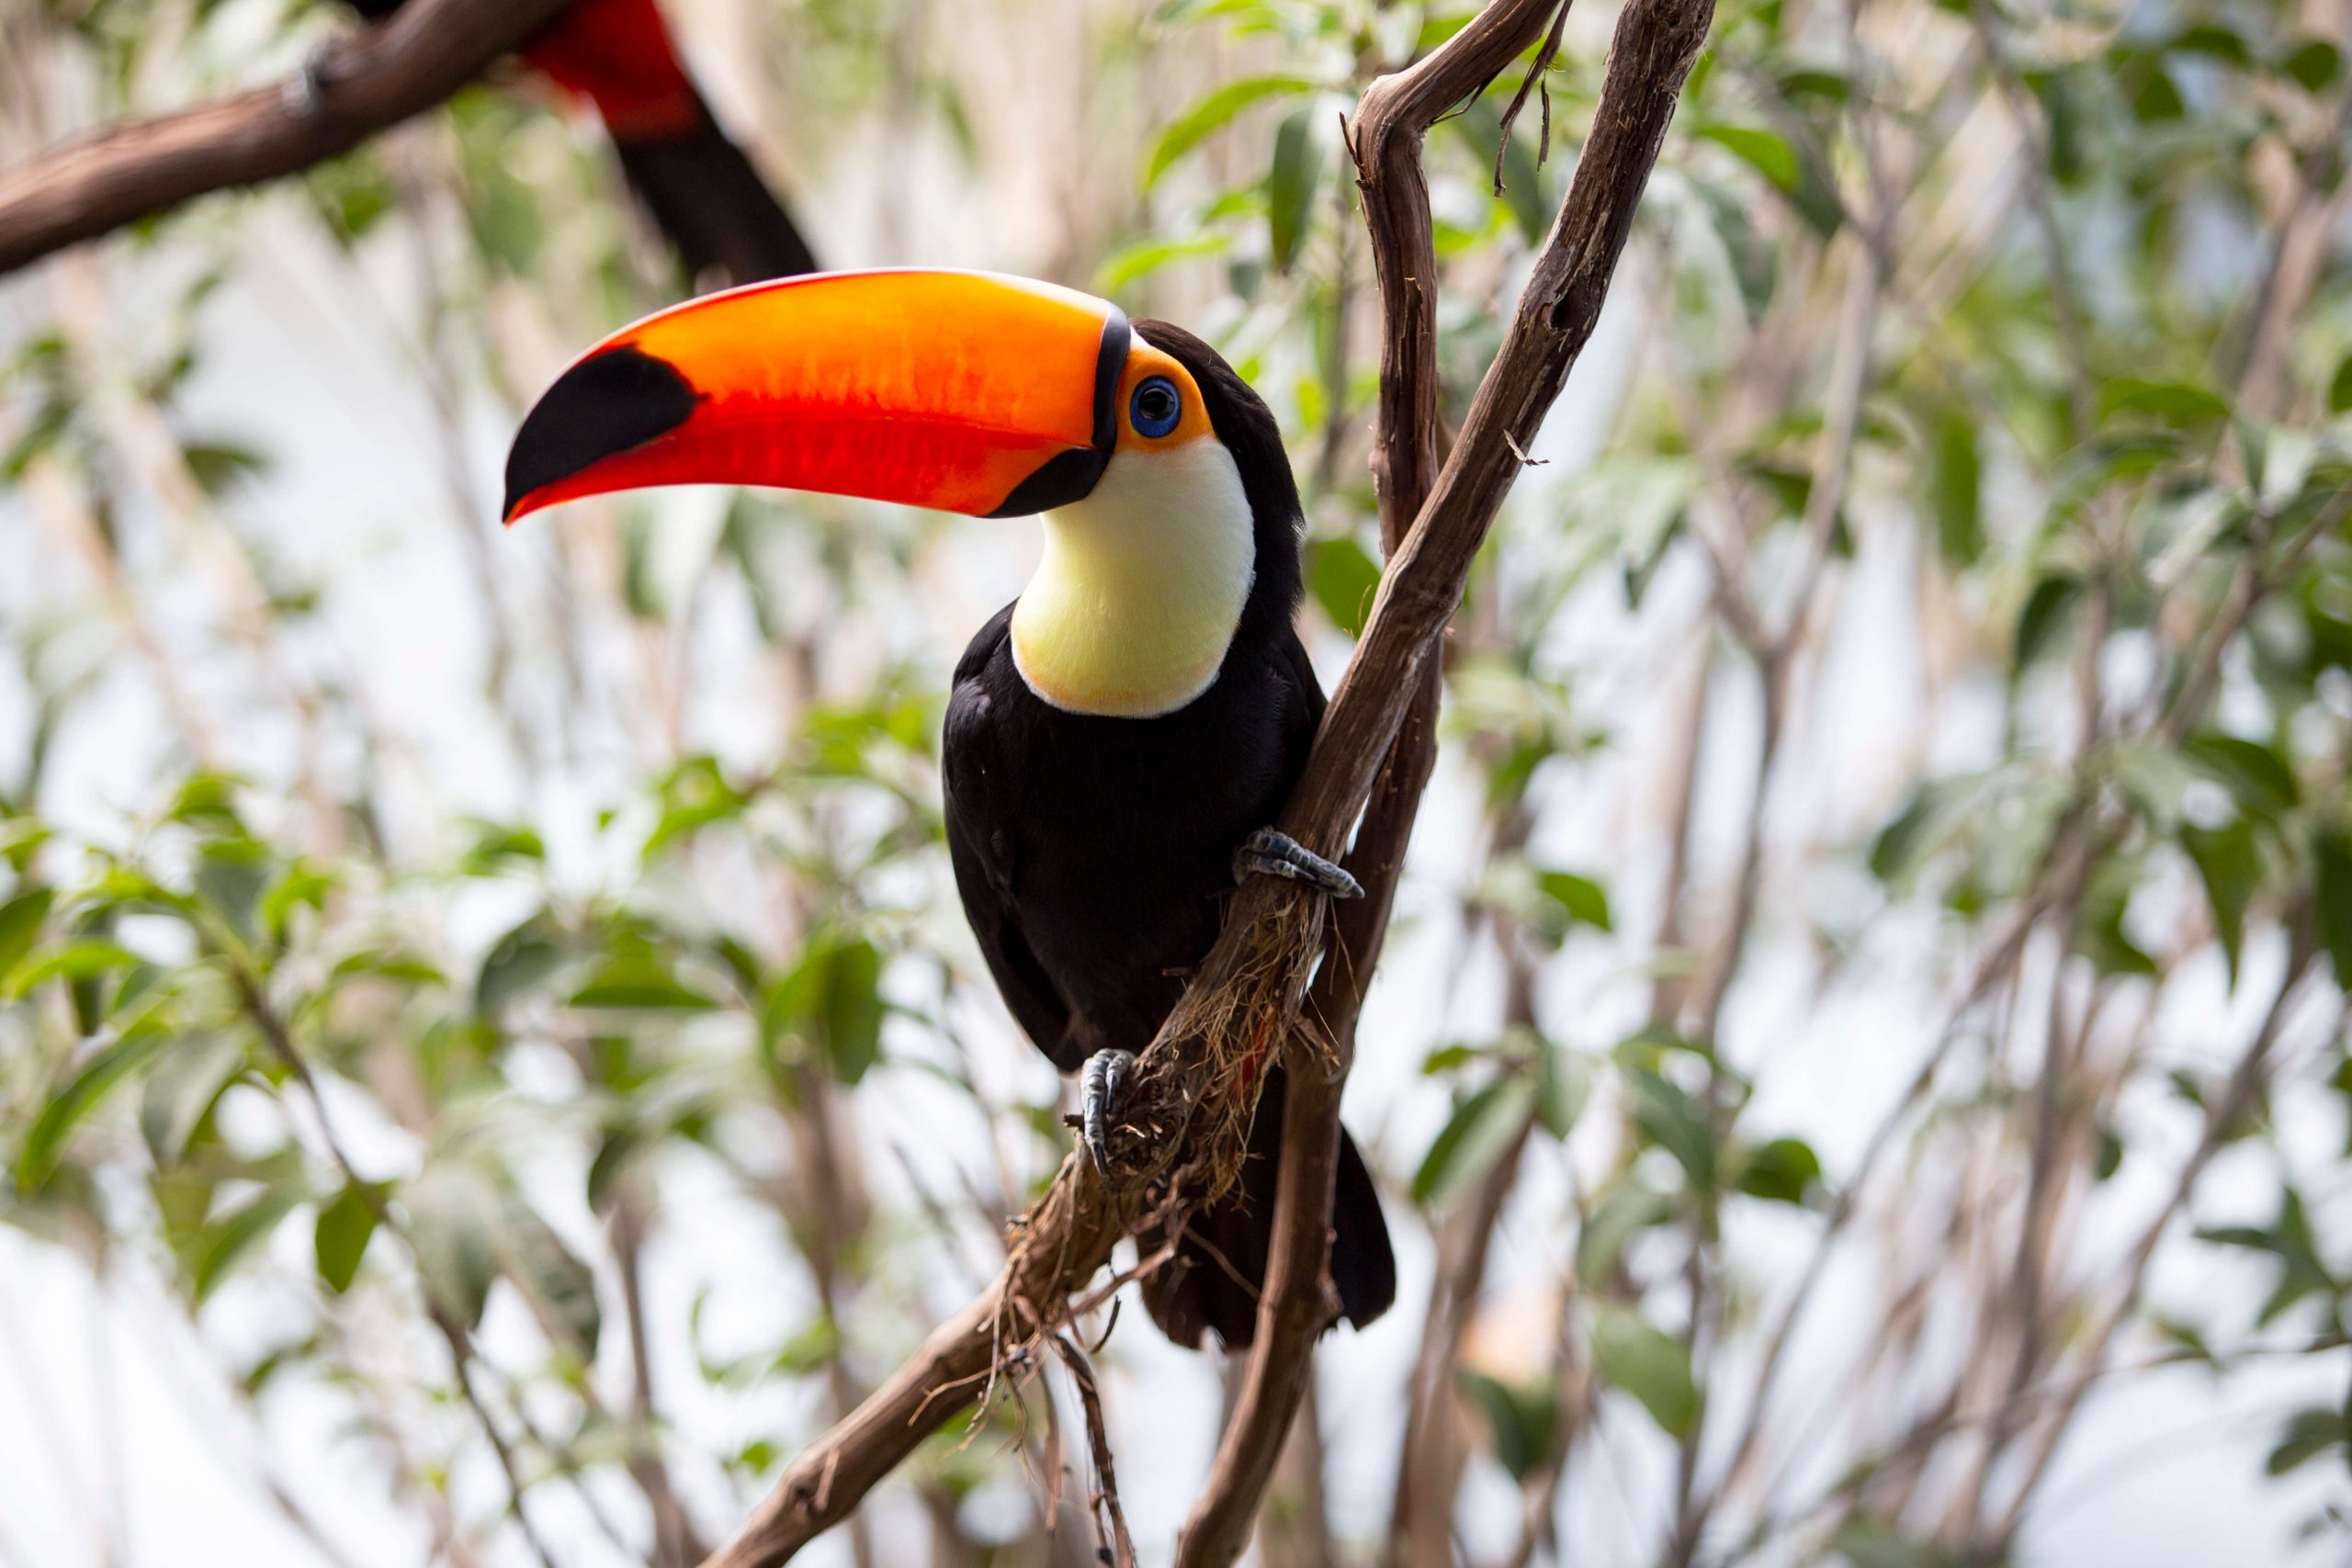 Toco Tucan perched on a branch